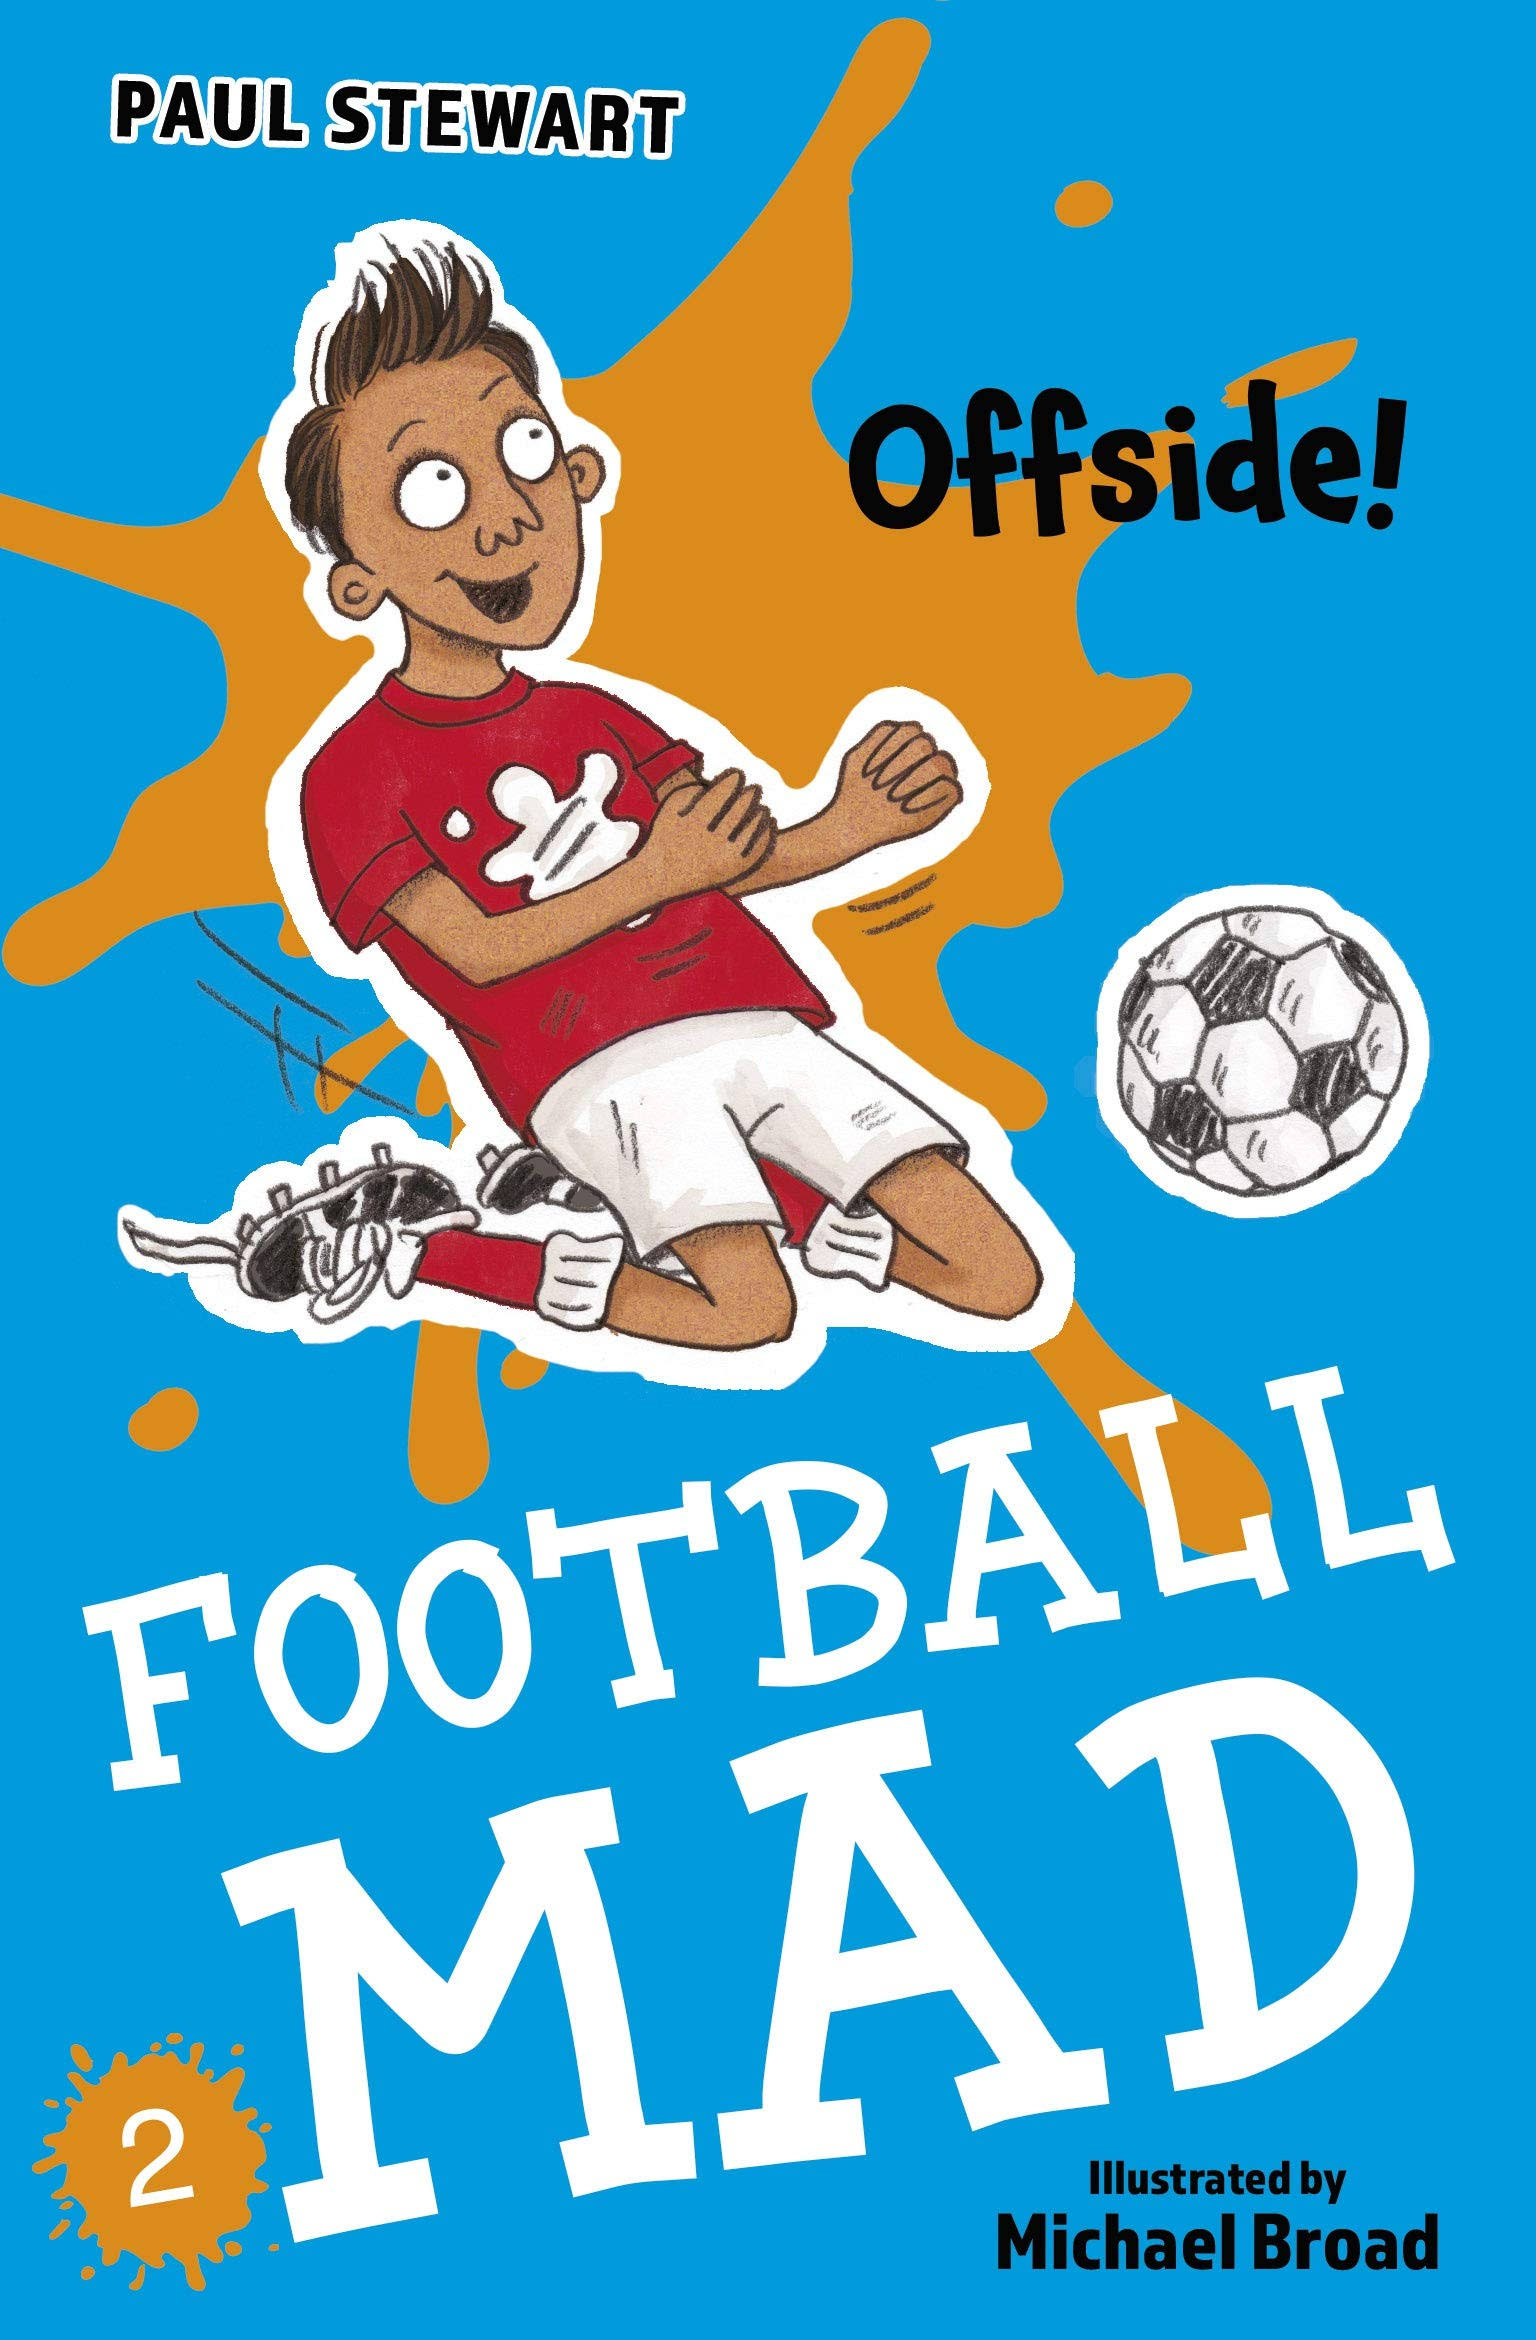 Offside (Football Mad #2) [Book]